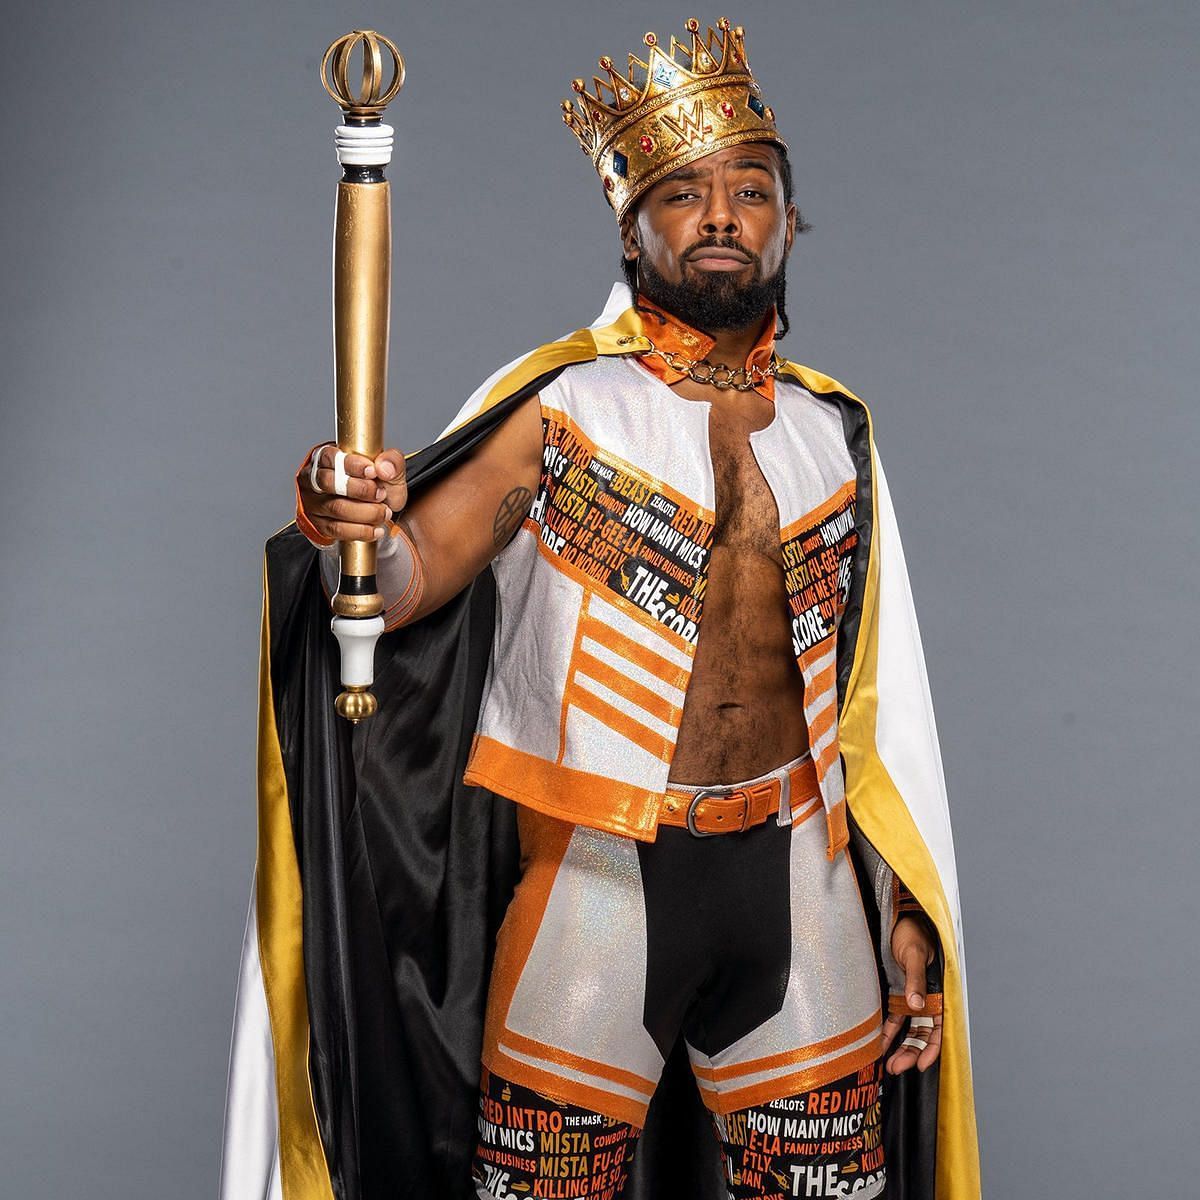 Xavier Woods is the last star to win King of the Ring.